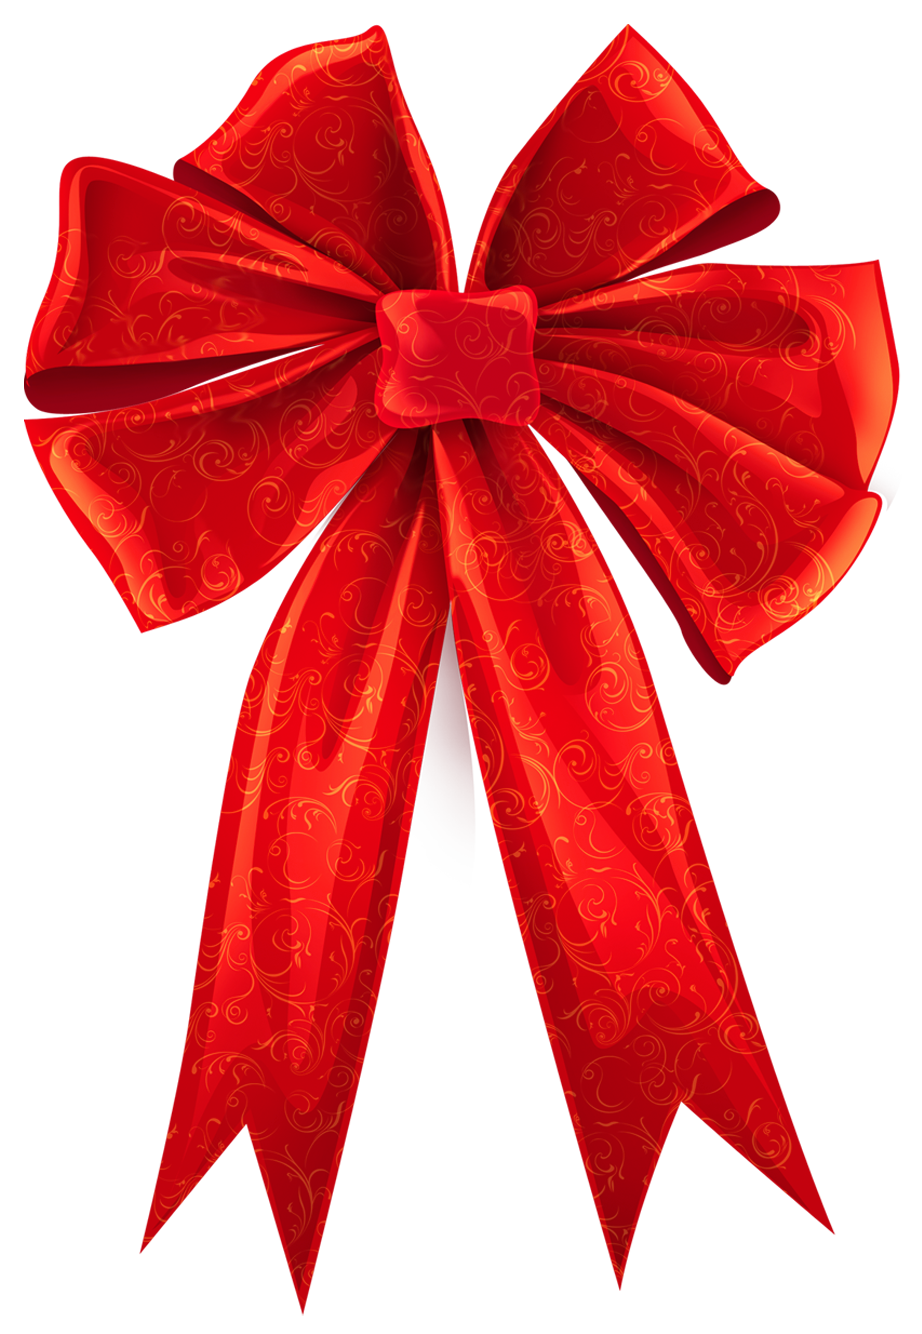 Red ribbon and bow clipart .